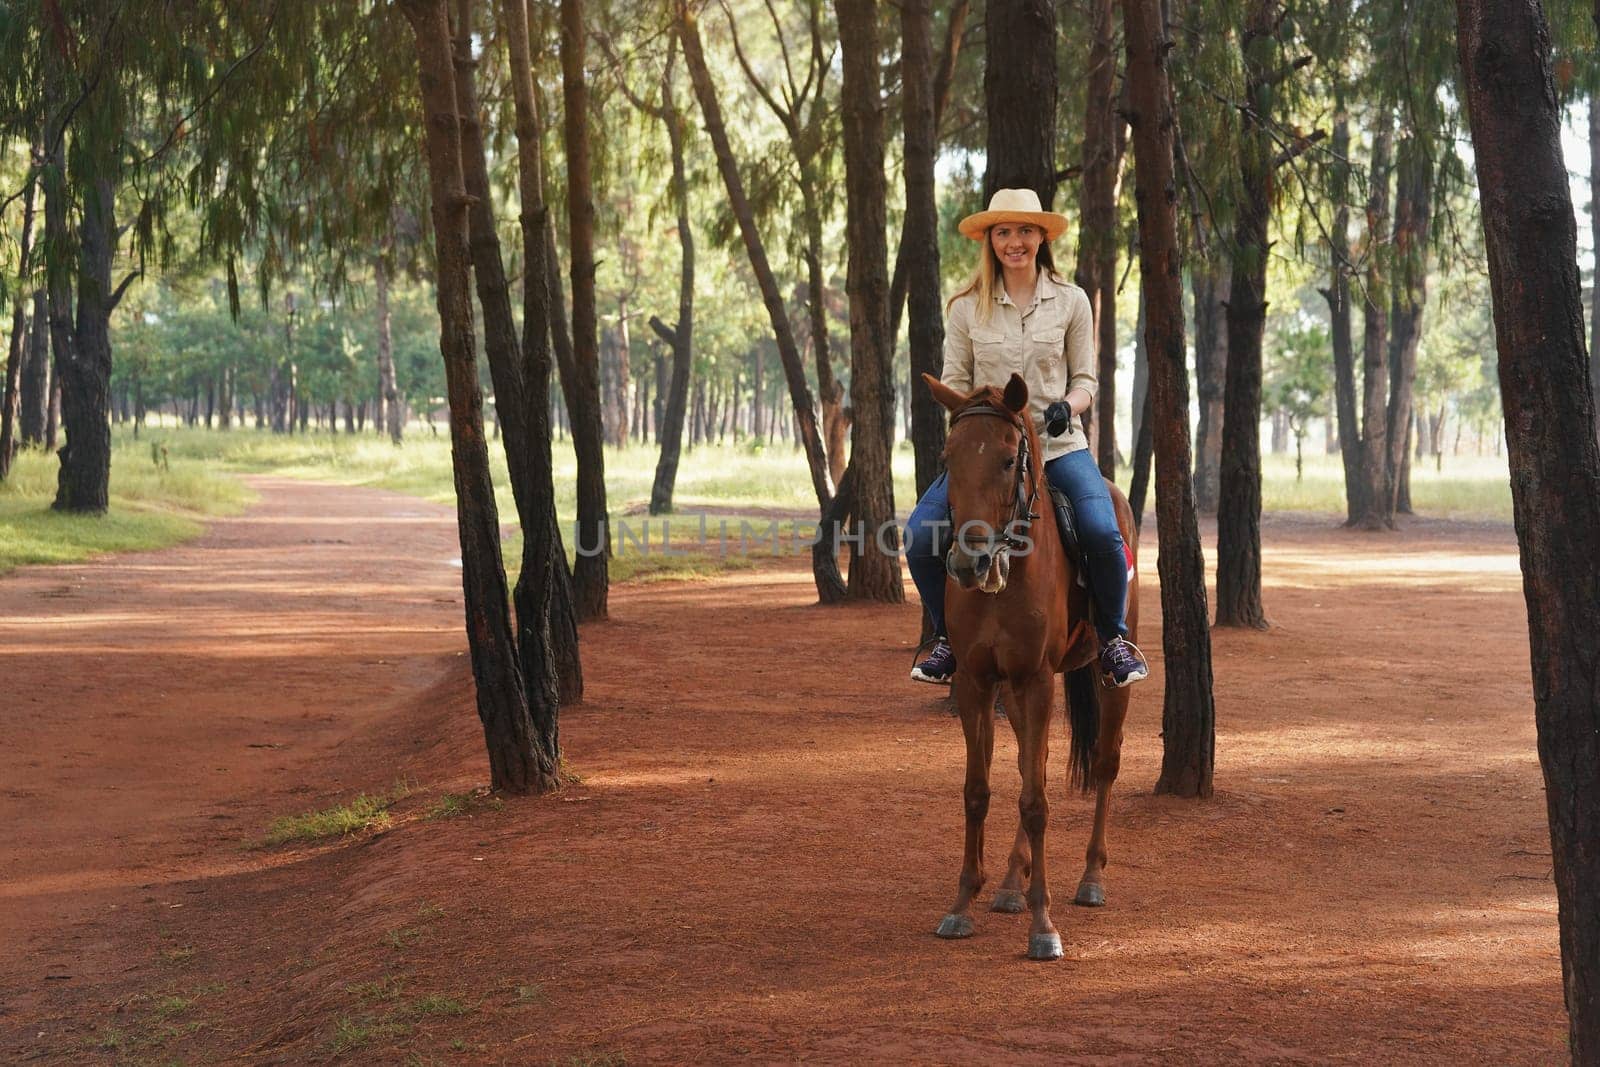 Young woman in shirt and straw hat, riding brown horse on park path, smiling, blurred trees in background by Ivanko